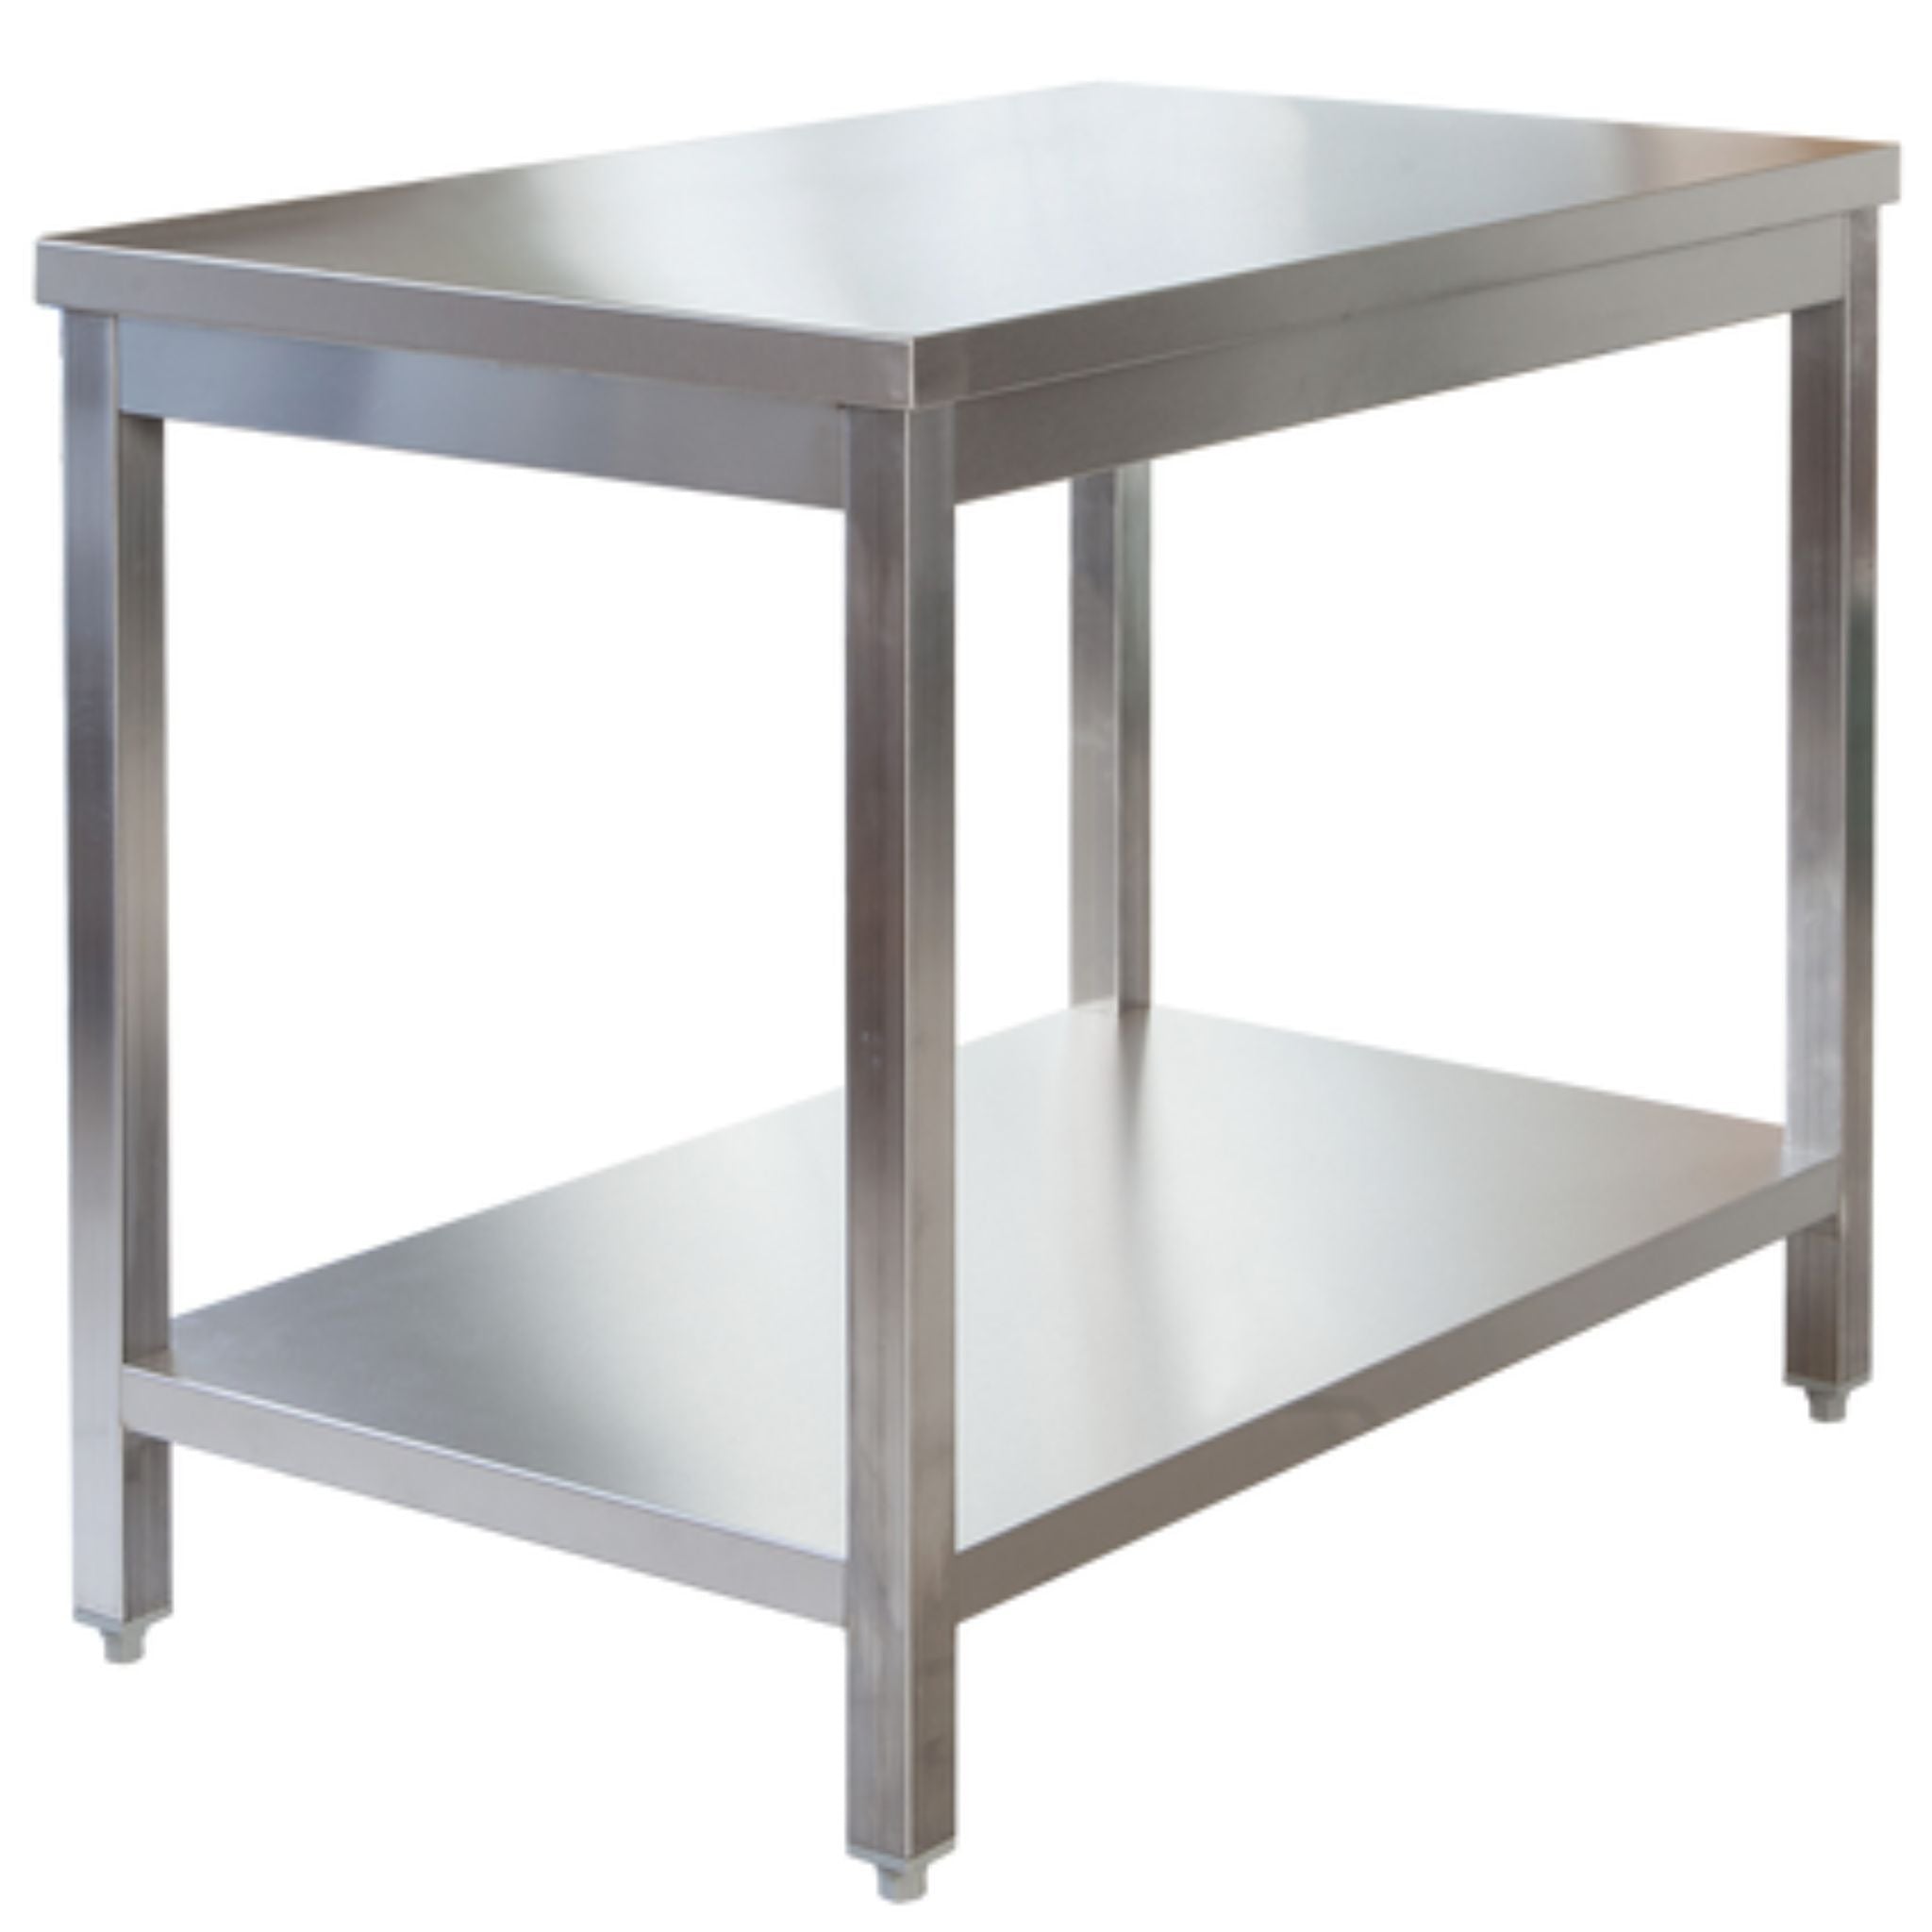 Professional stainless steel worktable with base